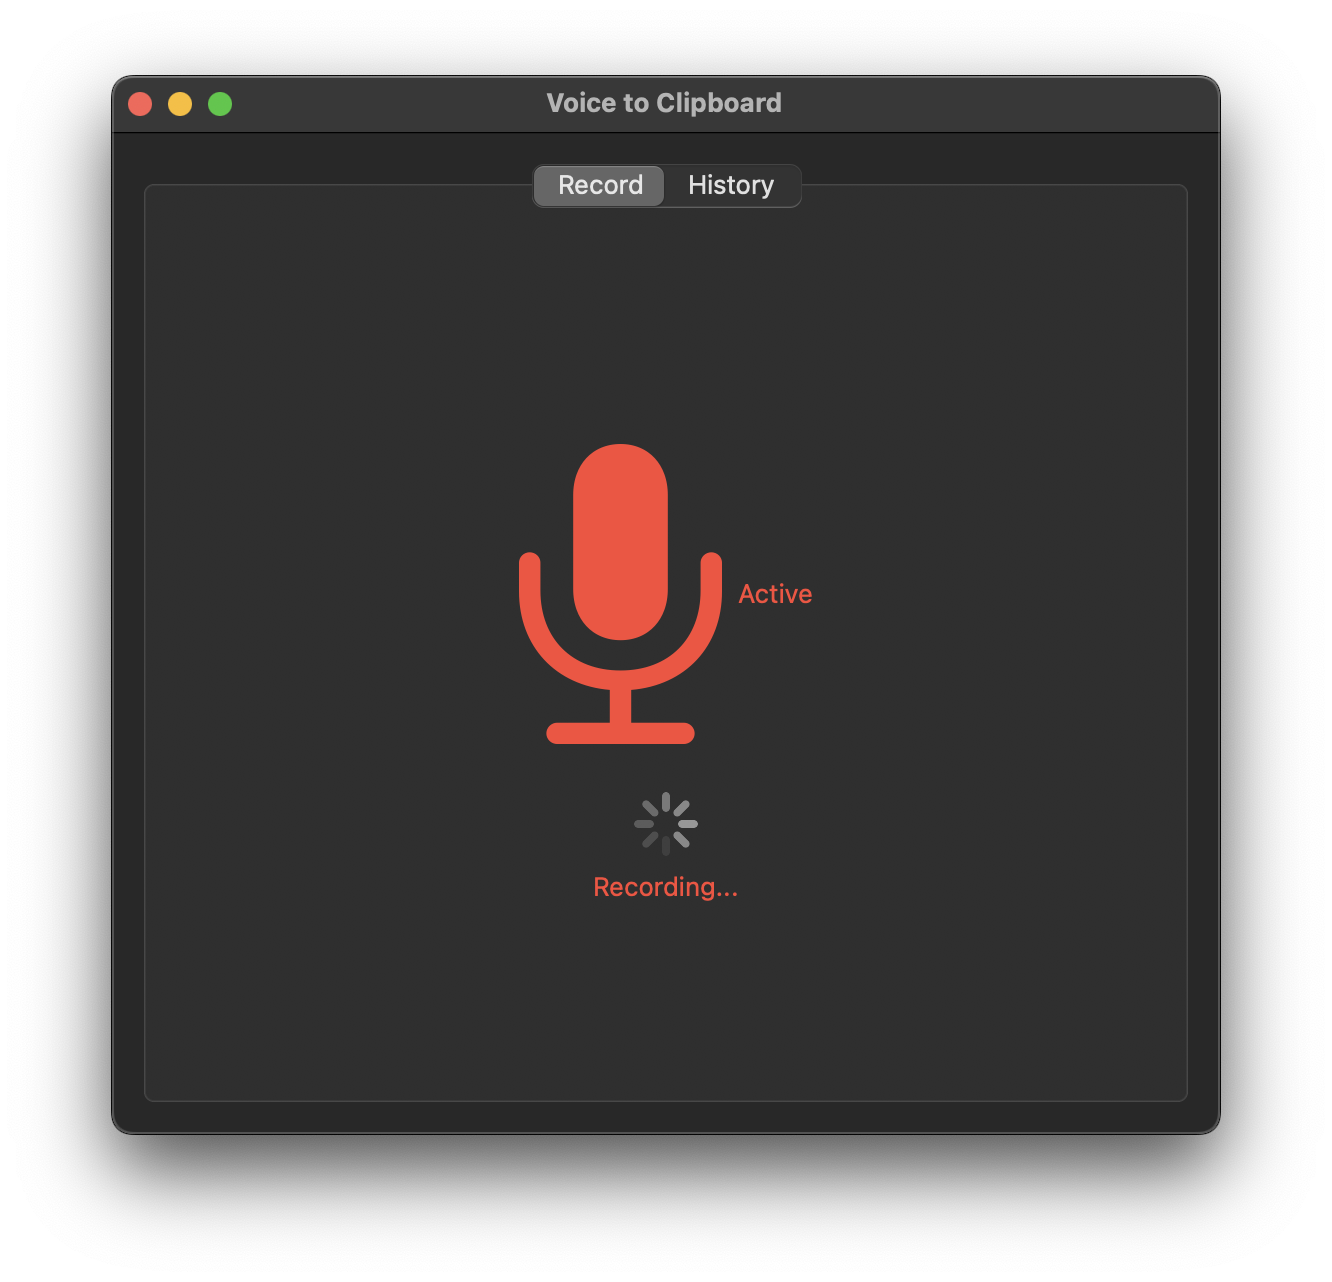 Voice to Clipboard for macOS